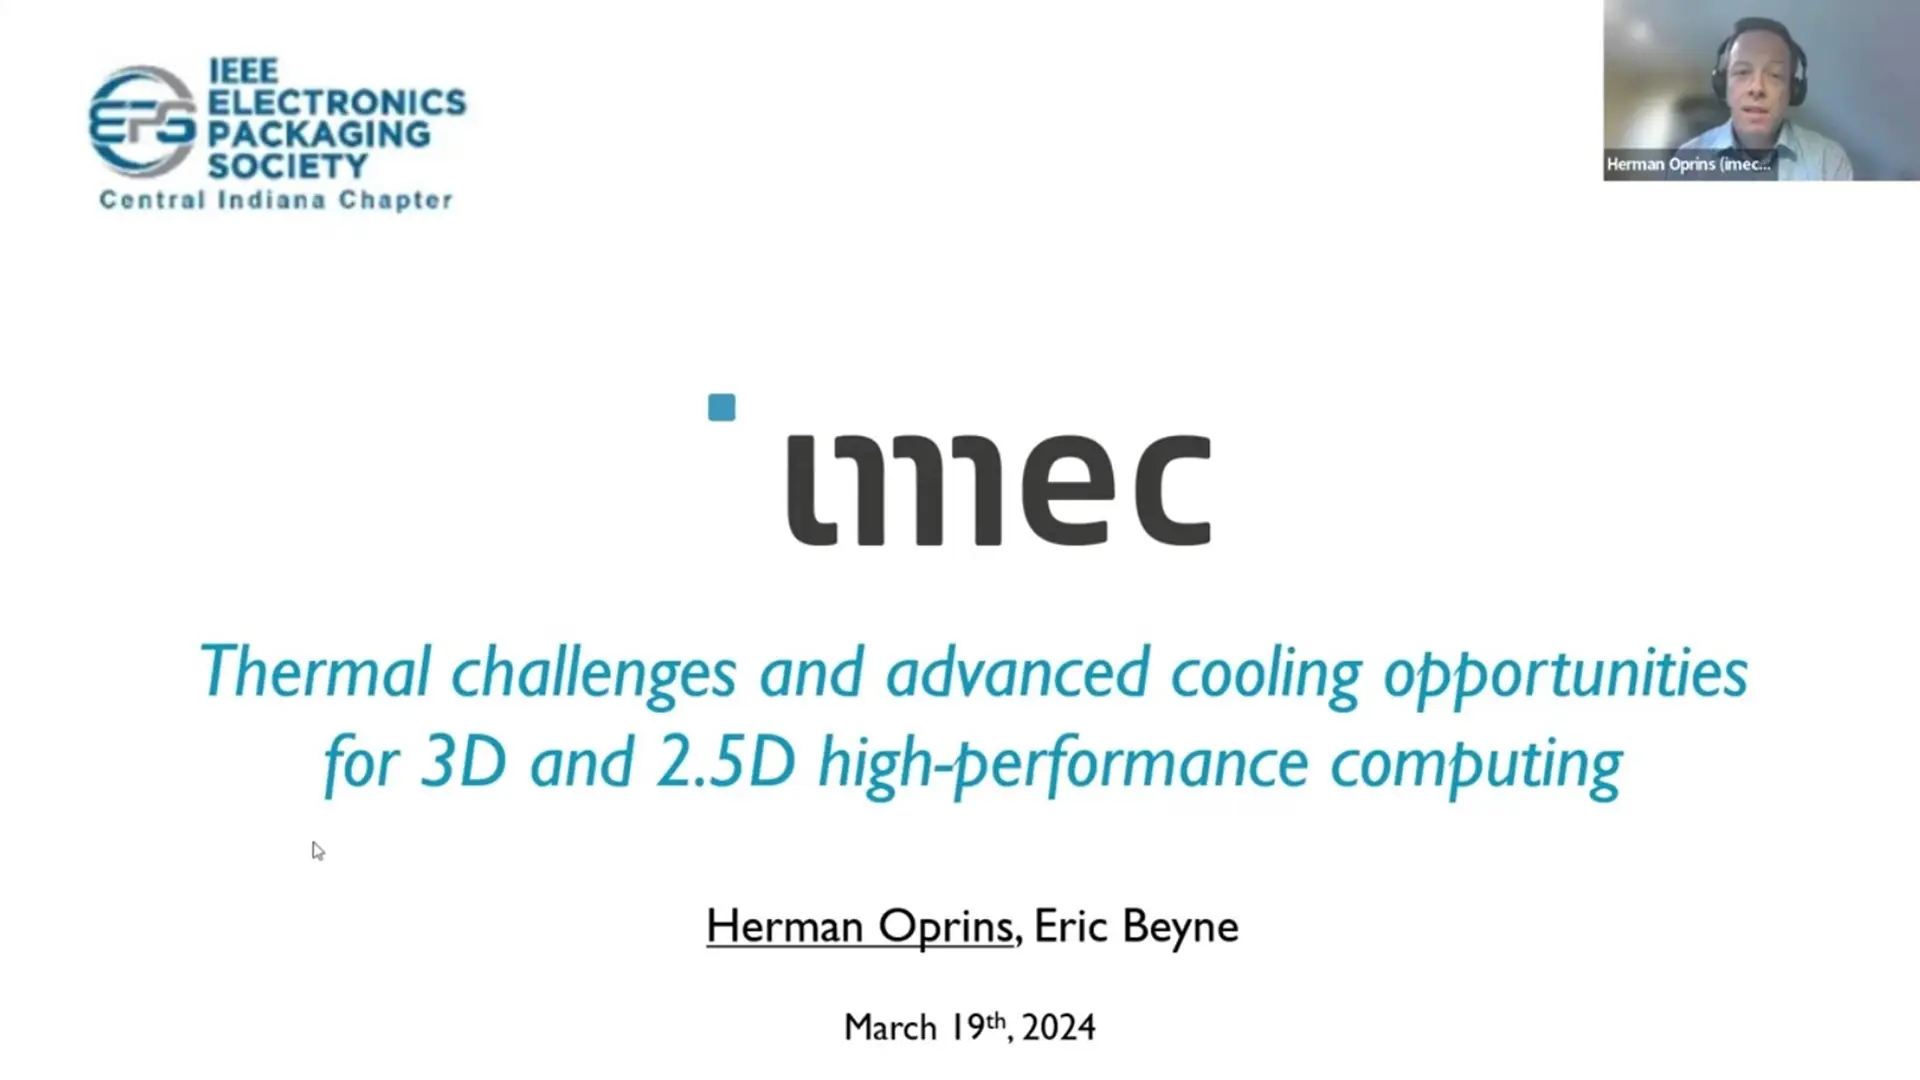 Thermal Challenges and Advanced Cooling Opportunities for 2.5D and 3D High Performance Computing